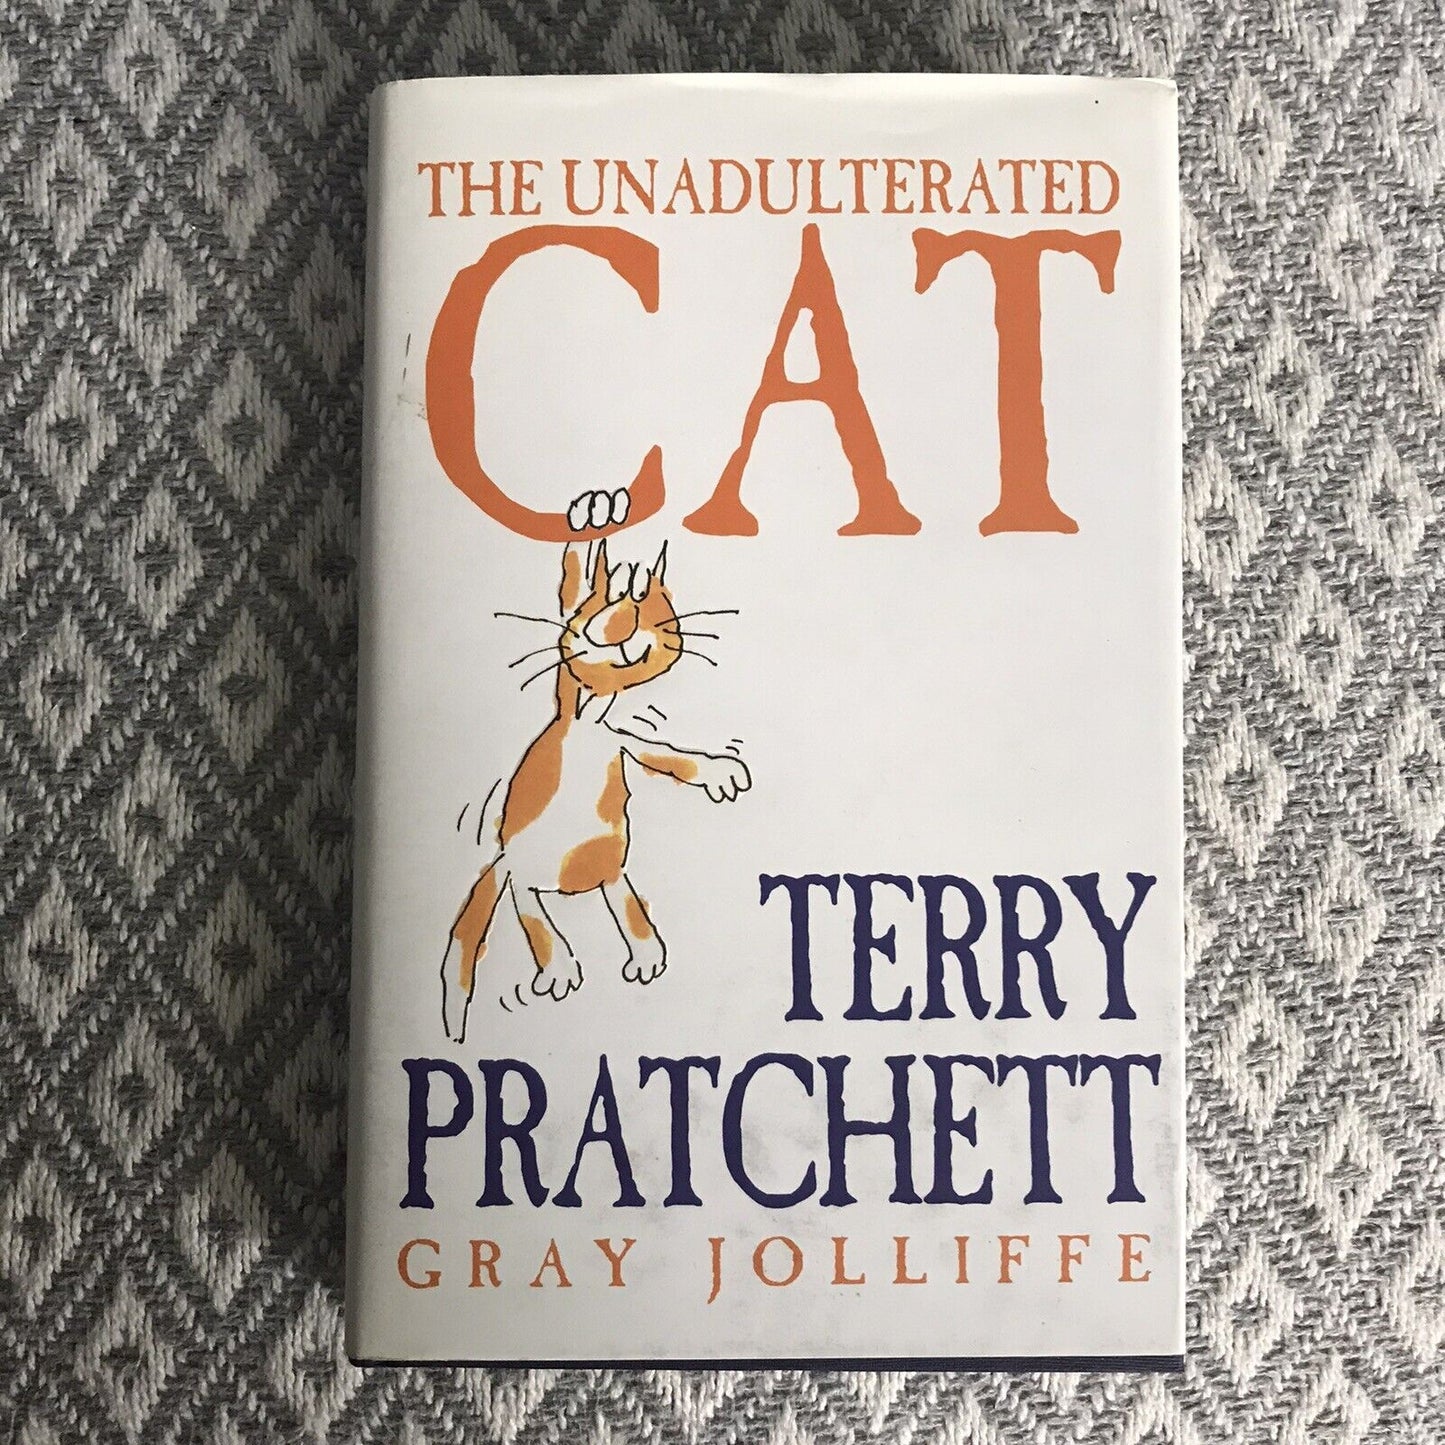 The Unadulterated Cat by Terry Pratchett (Hardcover, 2002)